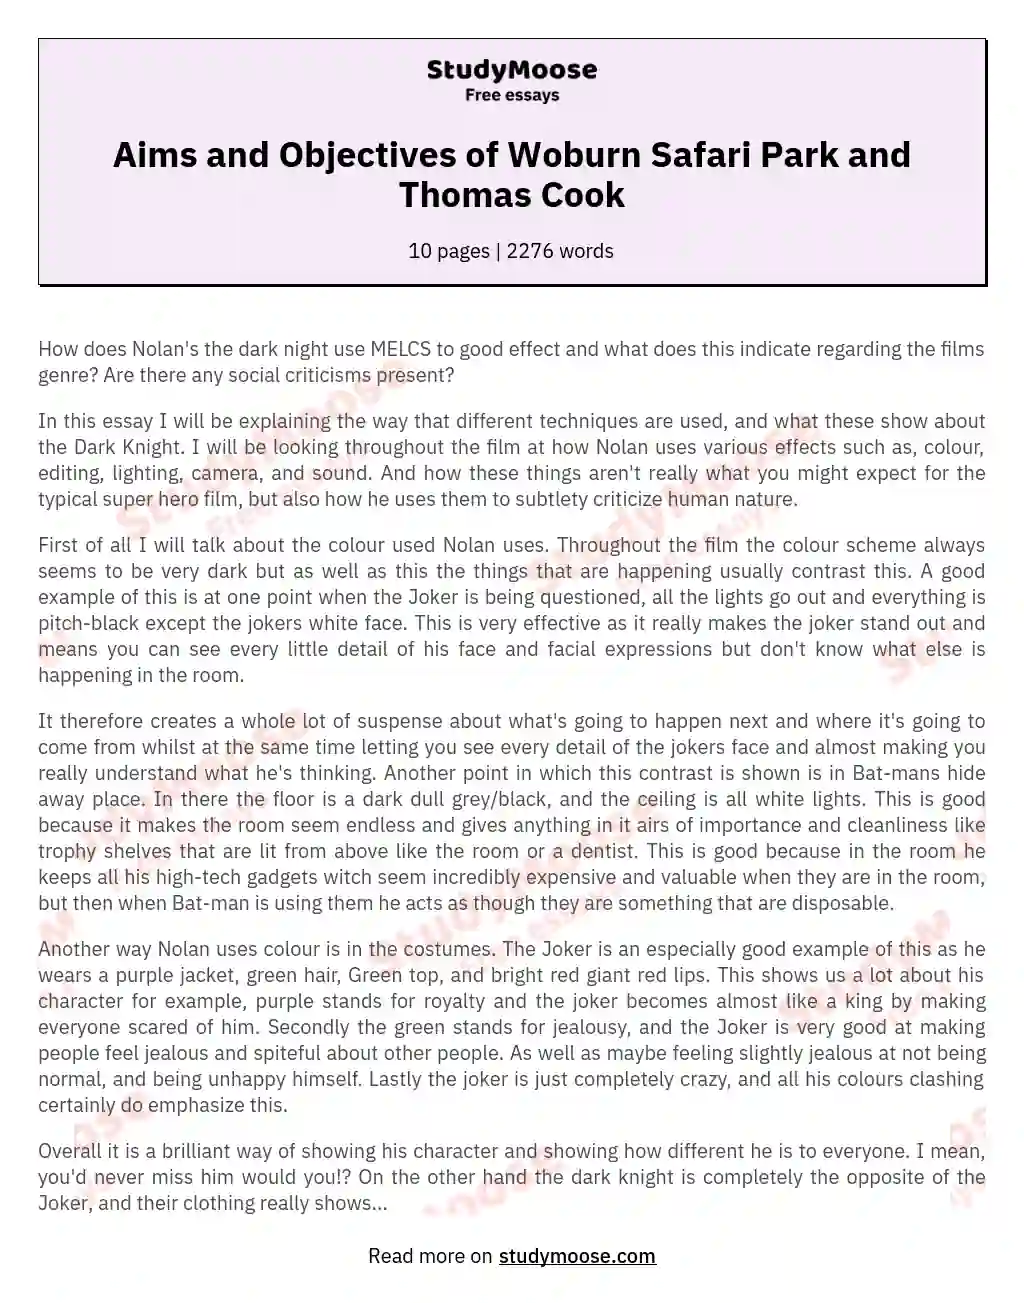 Aims and Objectives of Woburn Safari Park and Thomas Cook